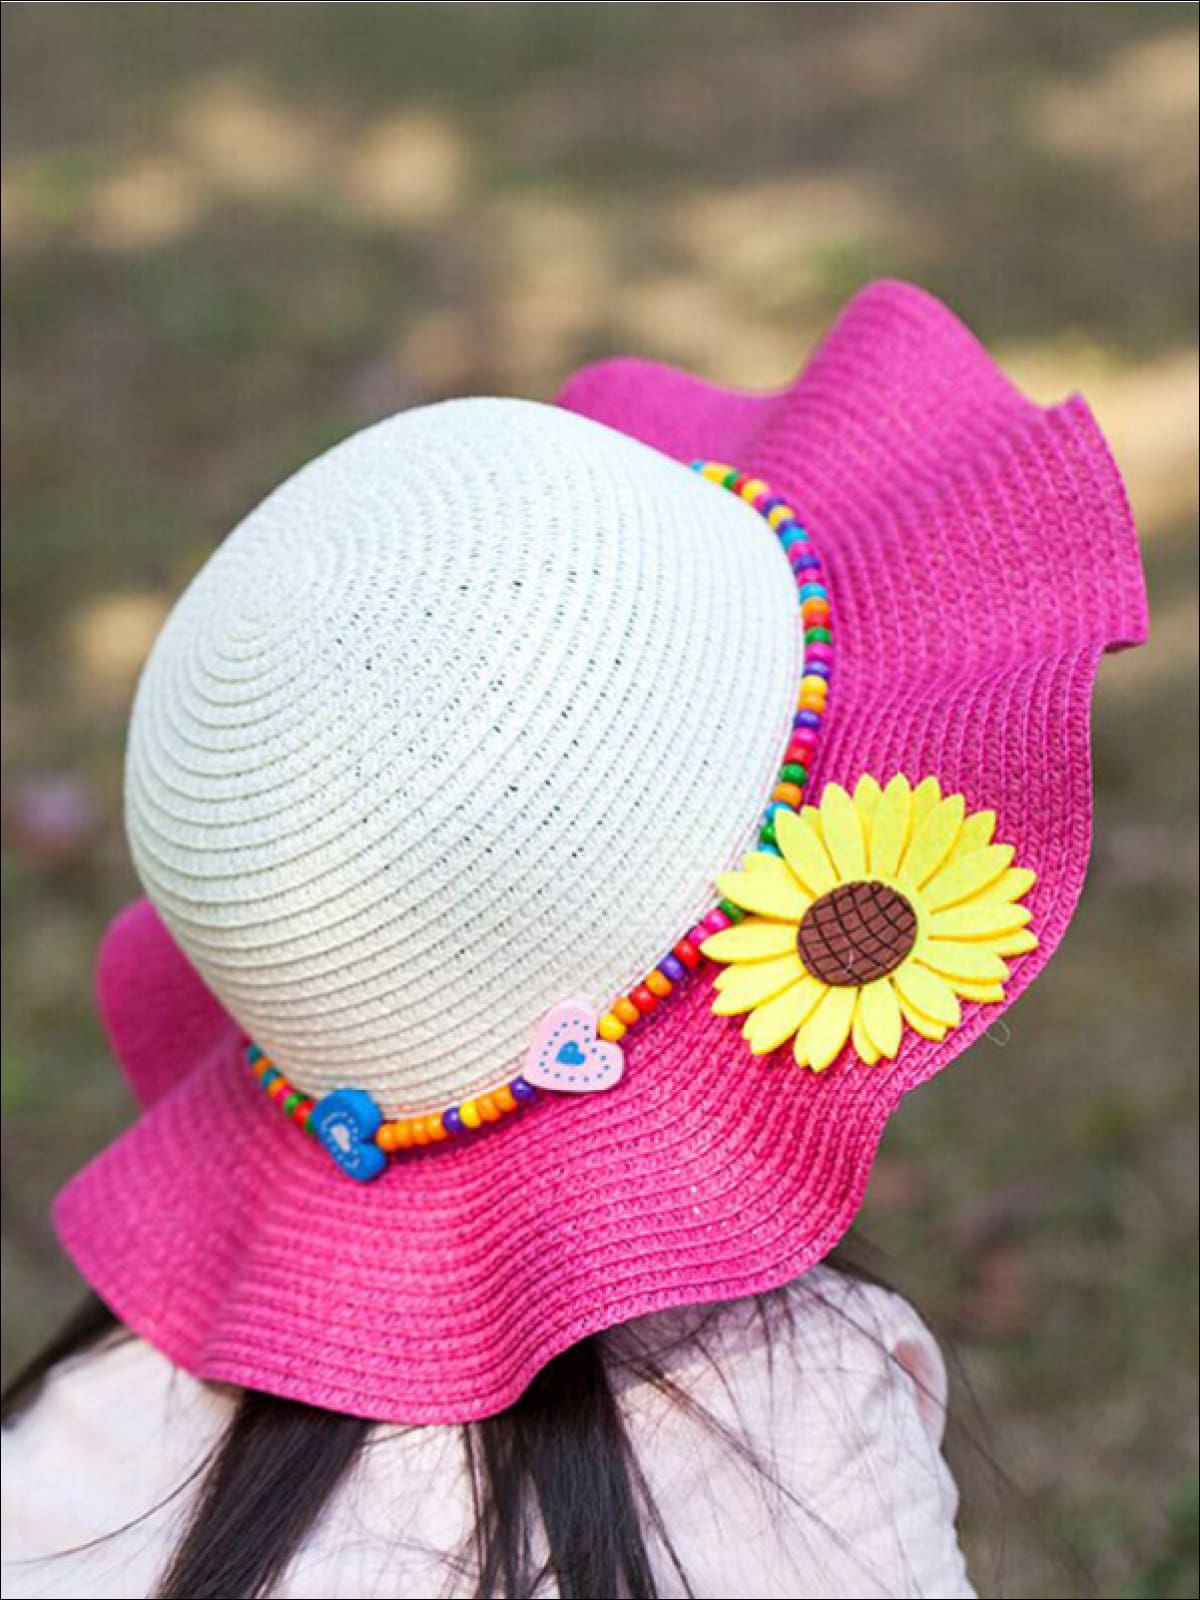 Girls Colorful Sunflower Straw Hat - Hot Pink - Girls Hats